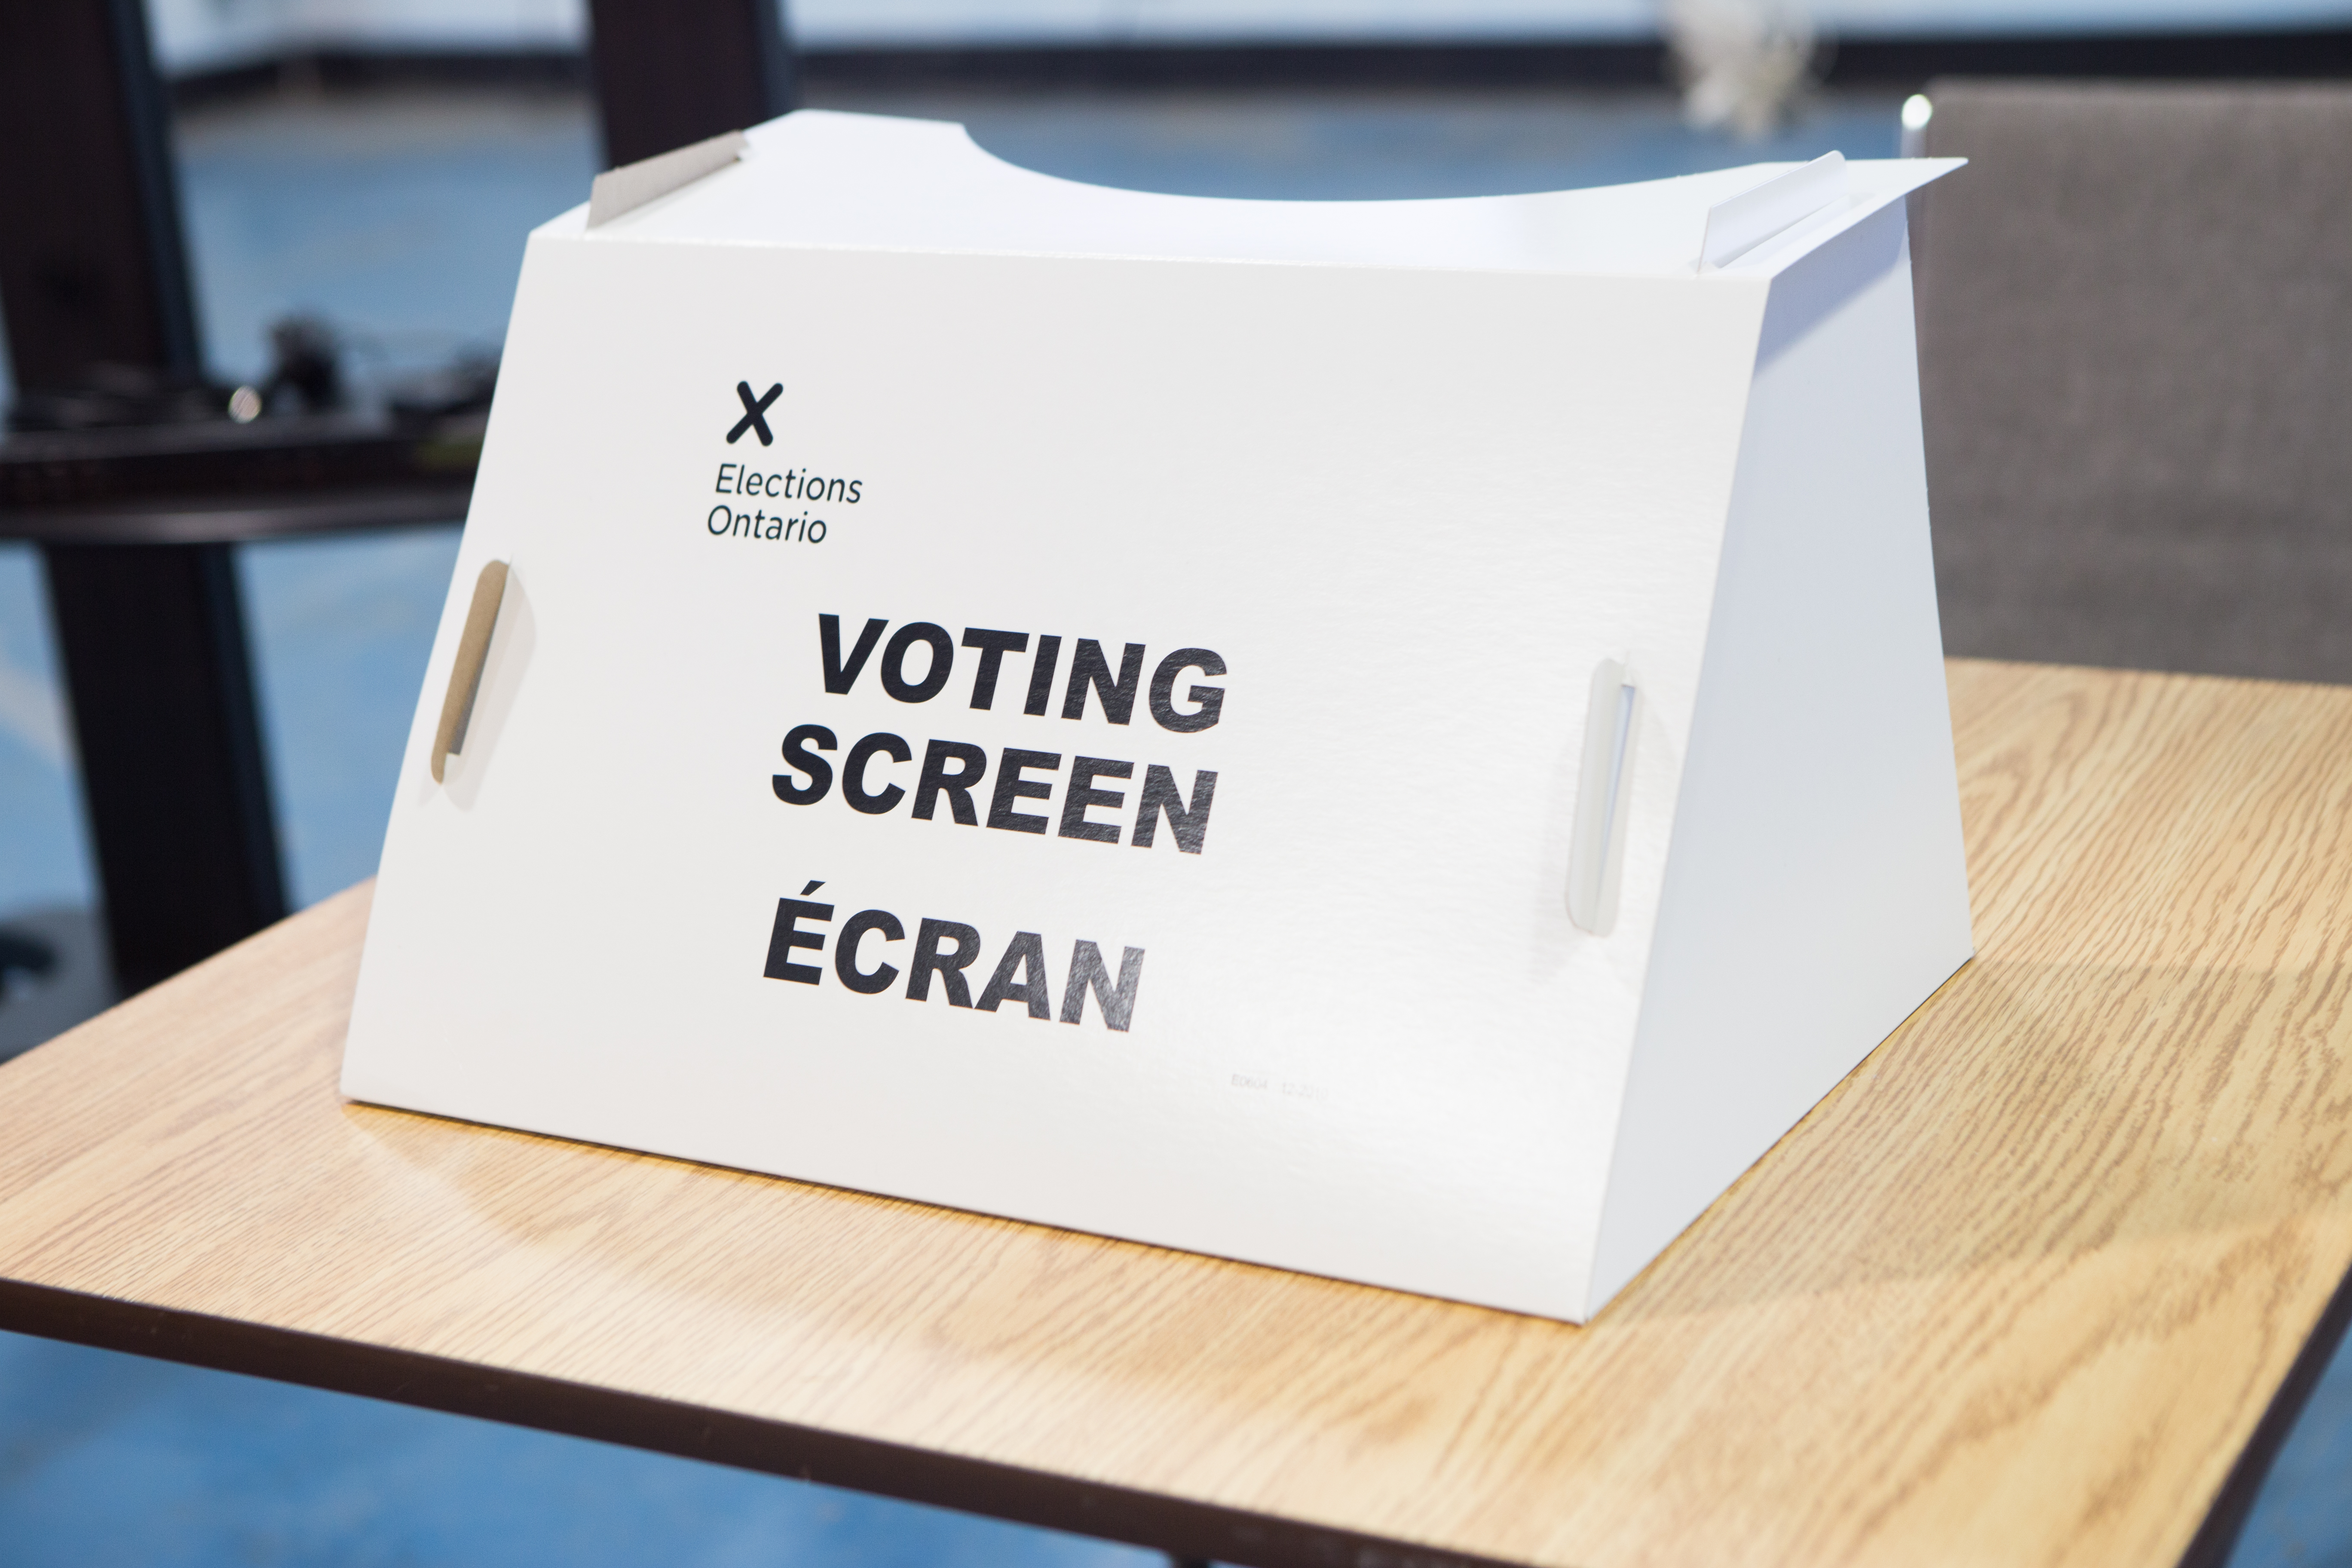 The polls are open for 12 hours for the provincial election